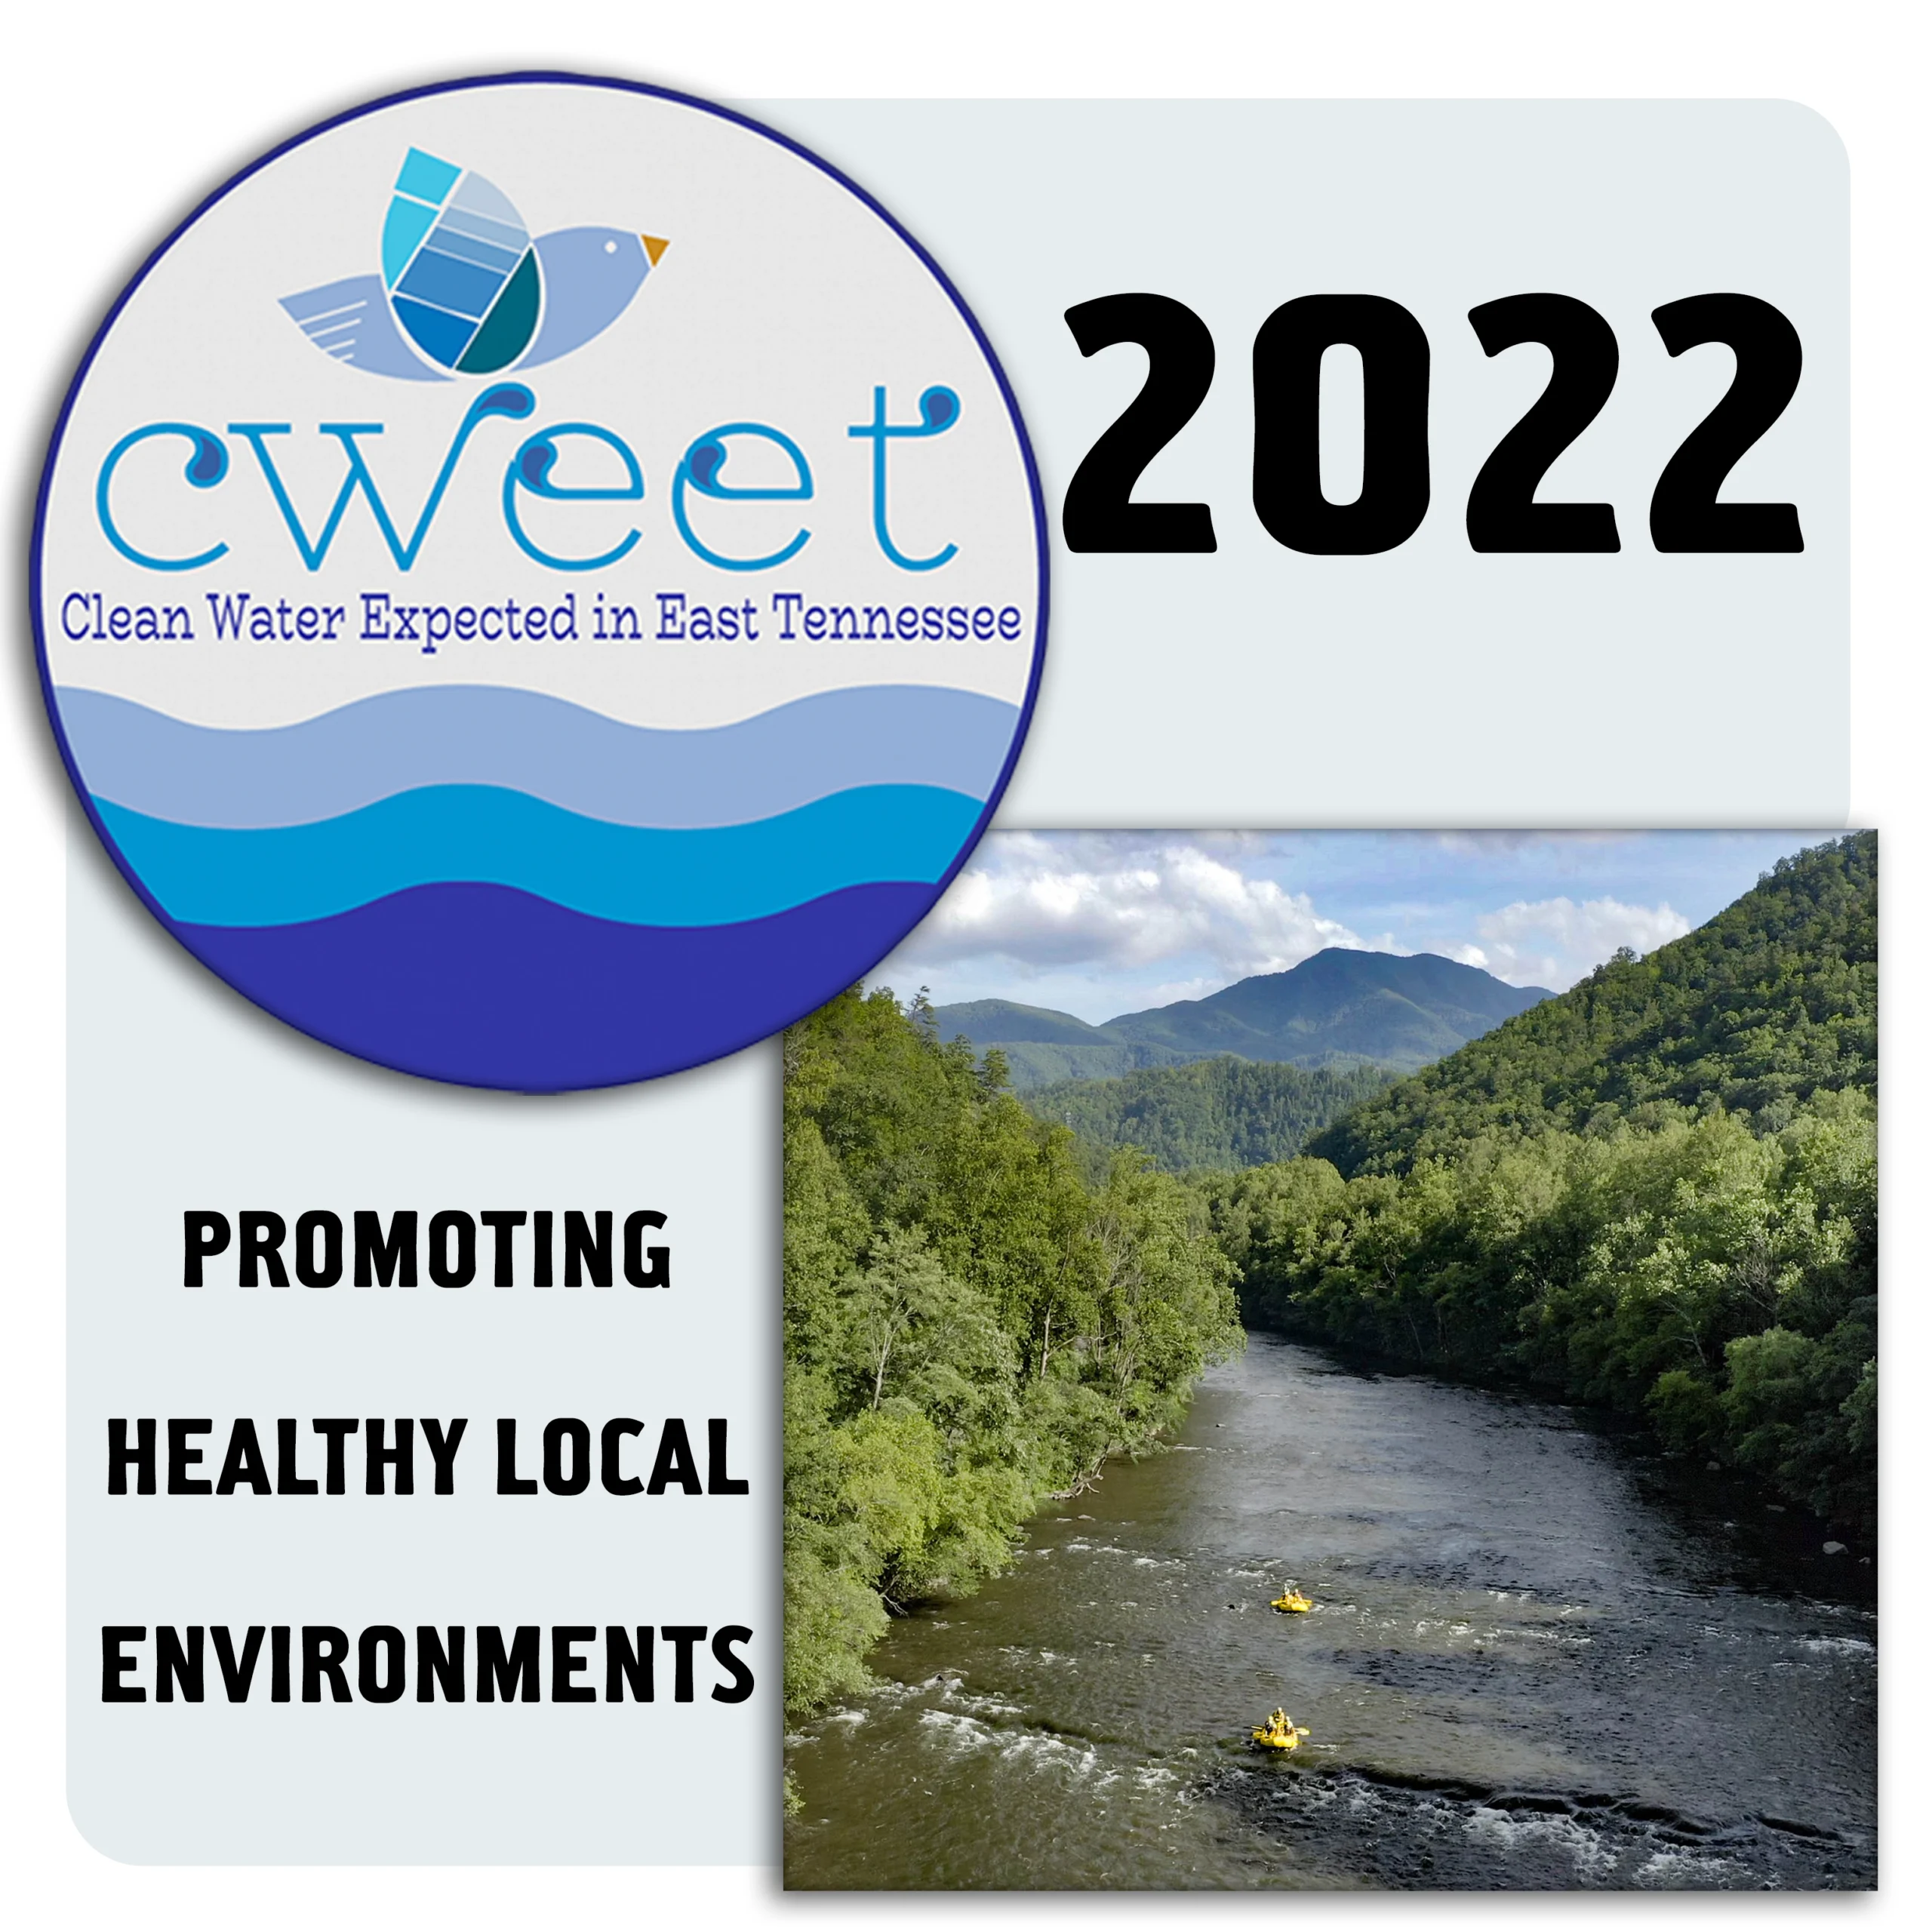 River Rat donates to CWEET to protect water and resources 2022